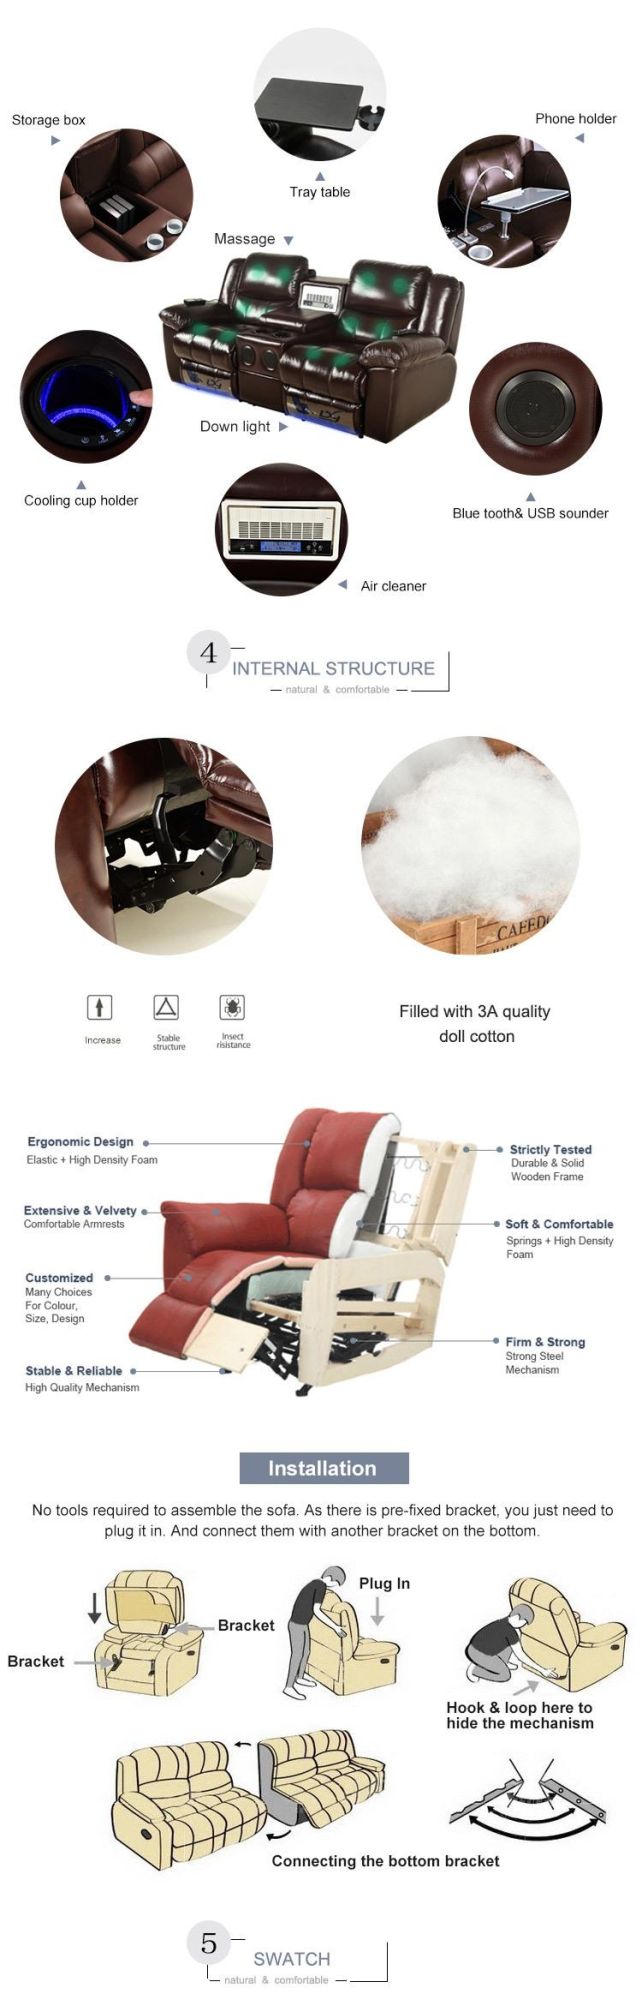 Best Selling Manual Recliner 100% Genuine Leather Sofa Home Furniture